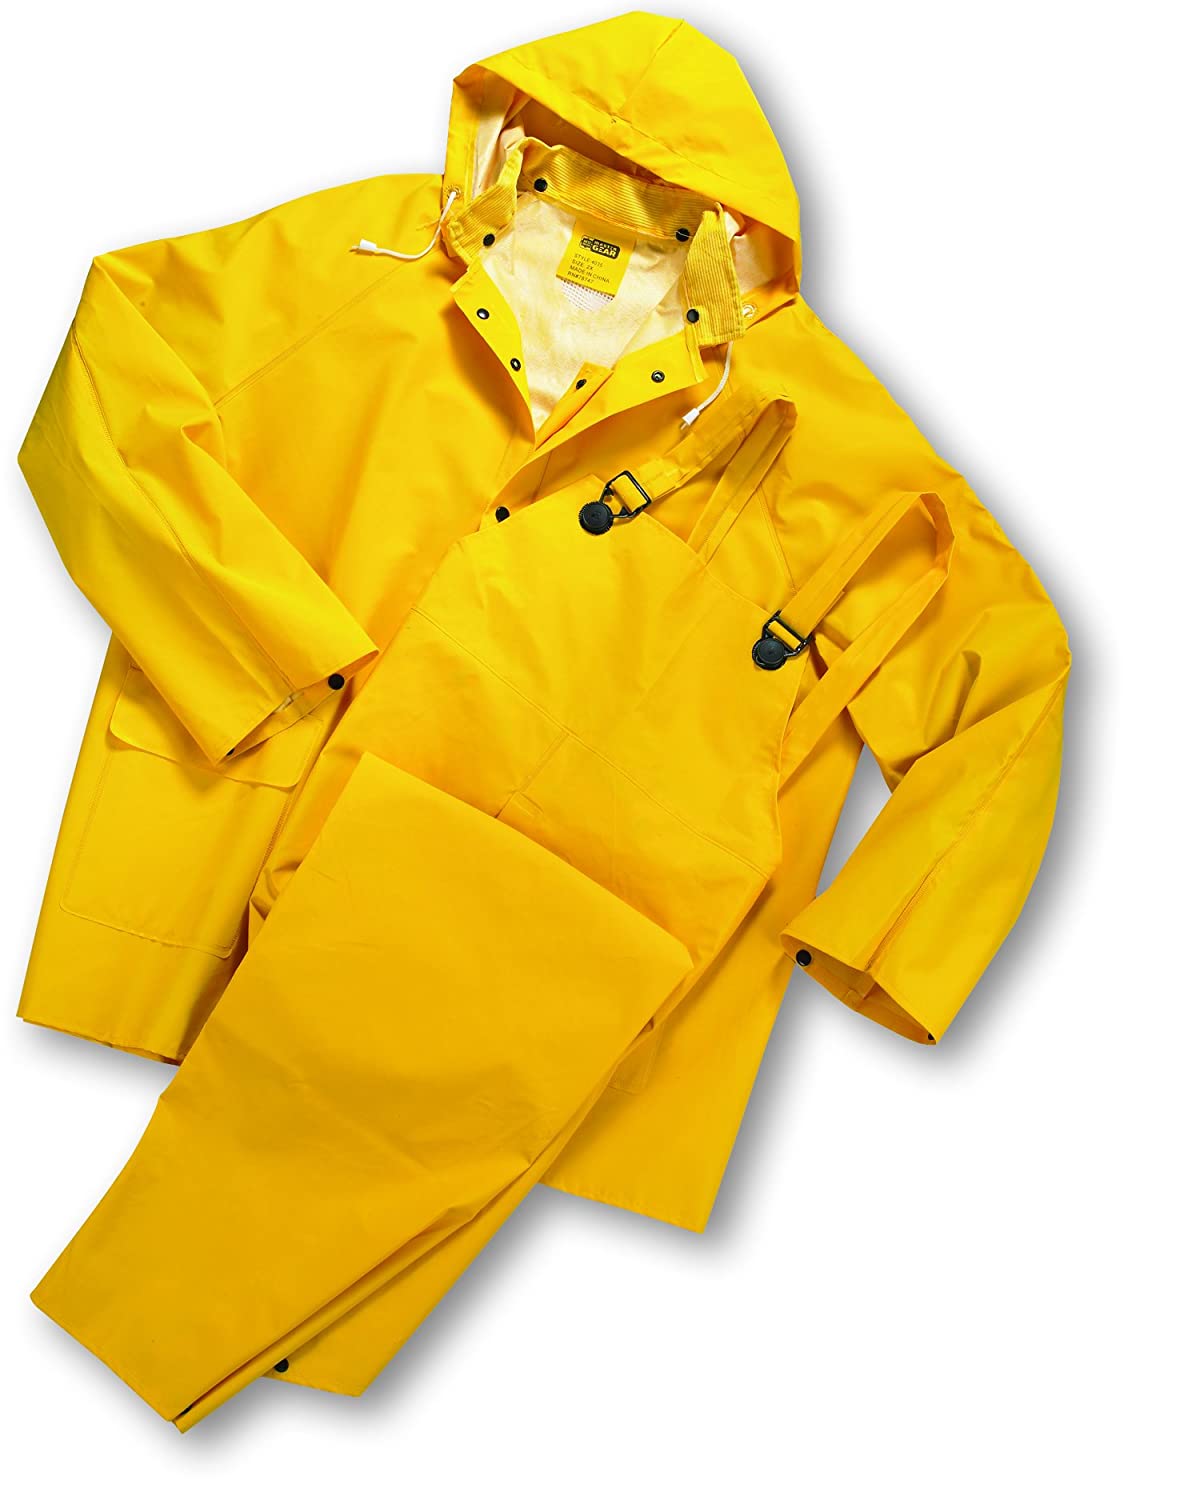 West Chester 4035FR Polyester Rain Suit [Yellow] 3X-Large, 0.35 mm PVC Coating, Limited Flammability, Flame Resistant Suit